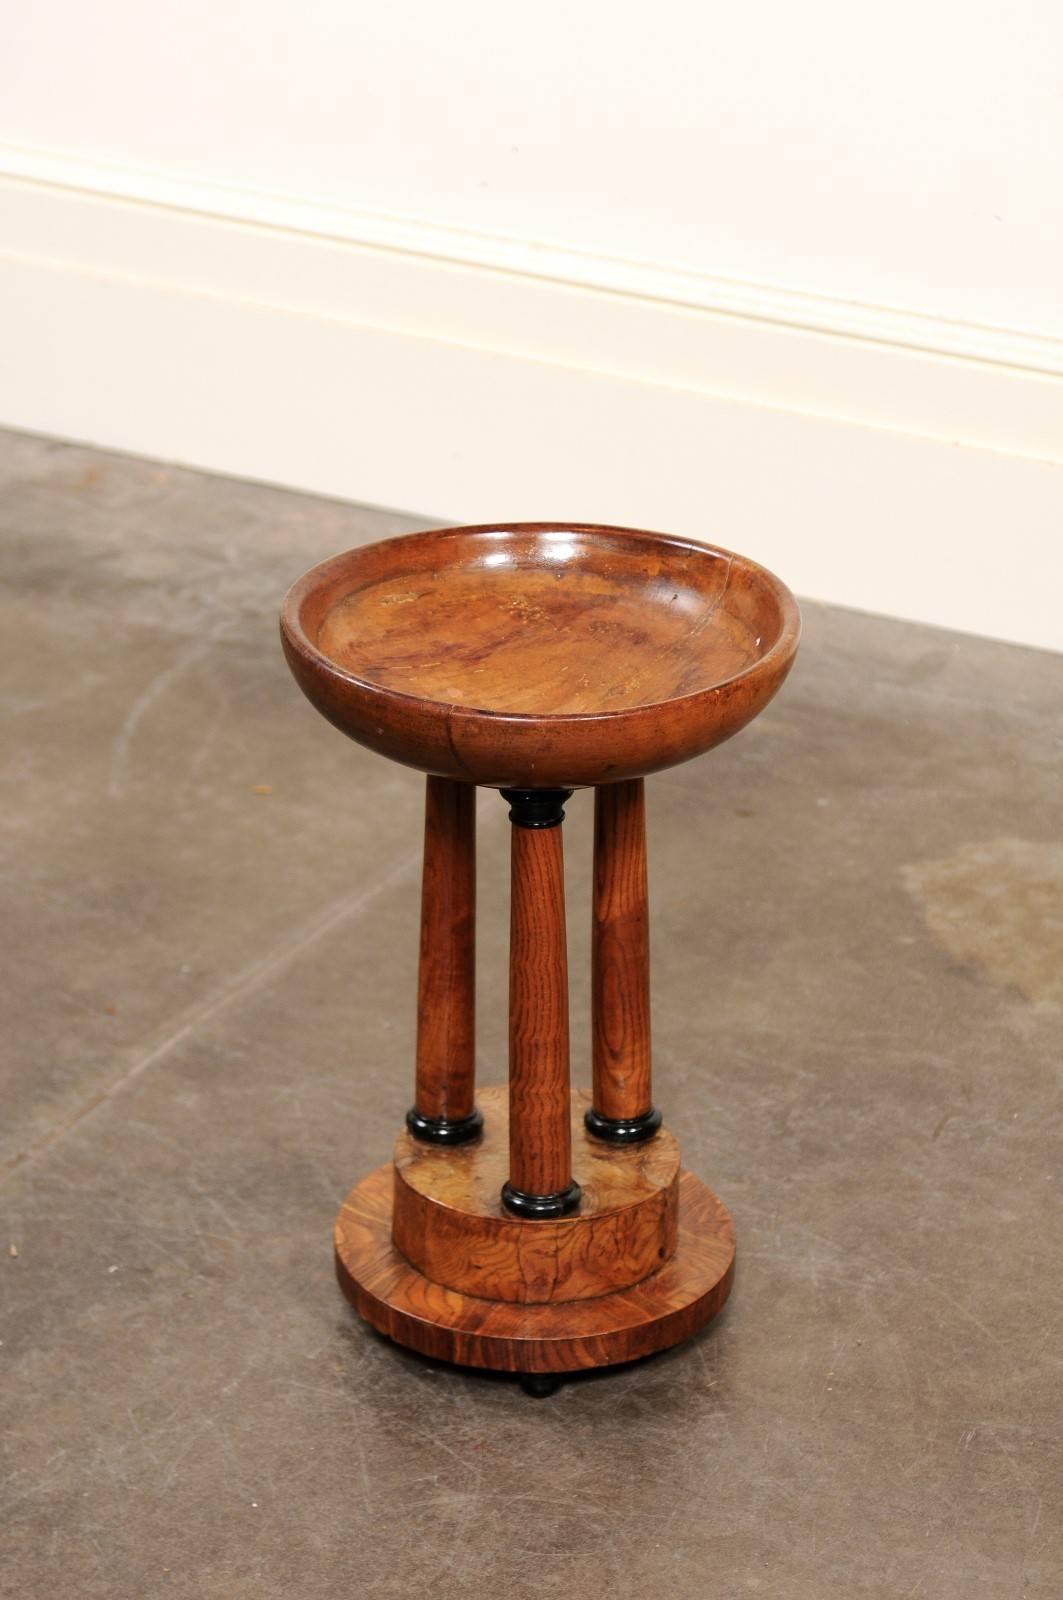 19th Century Austrian Biedermeier Wooden Compote with Classical Column Stand, circa 1840 For Sale